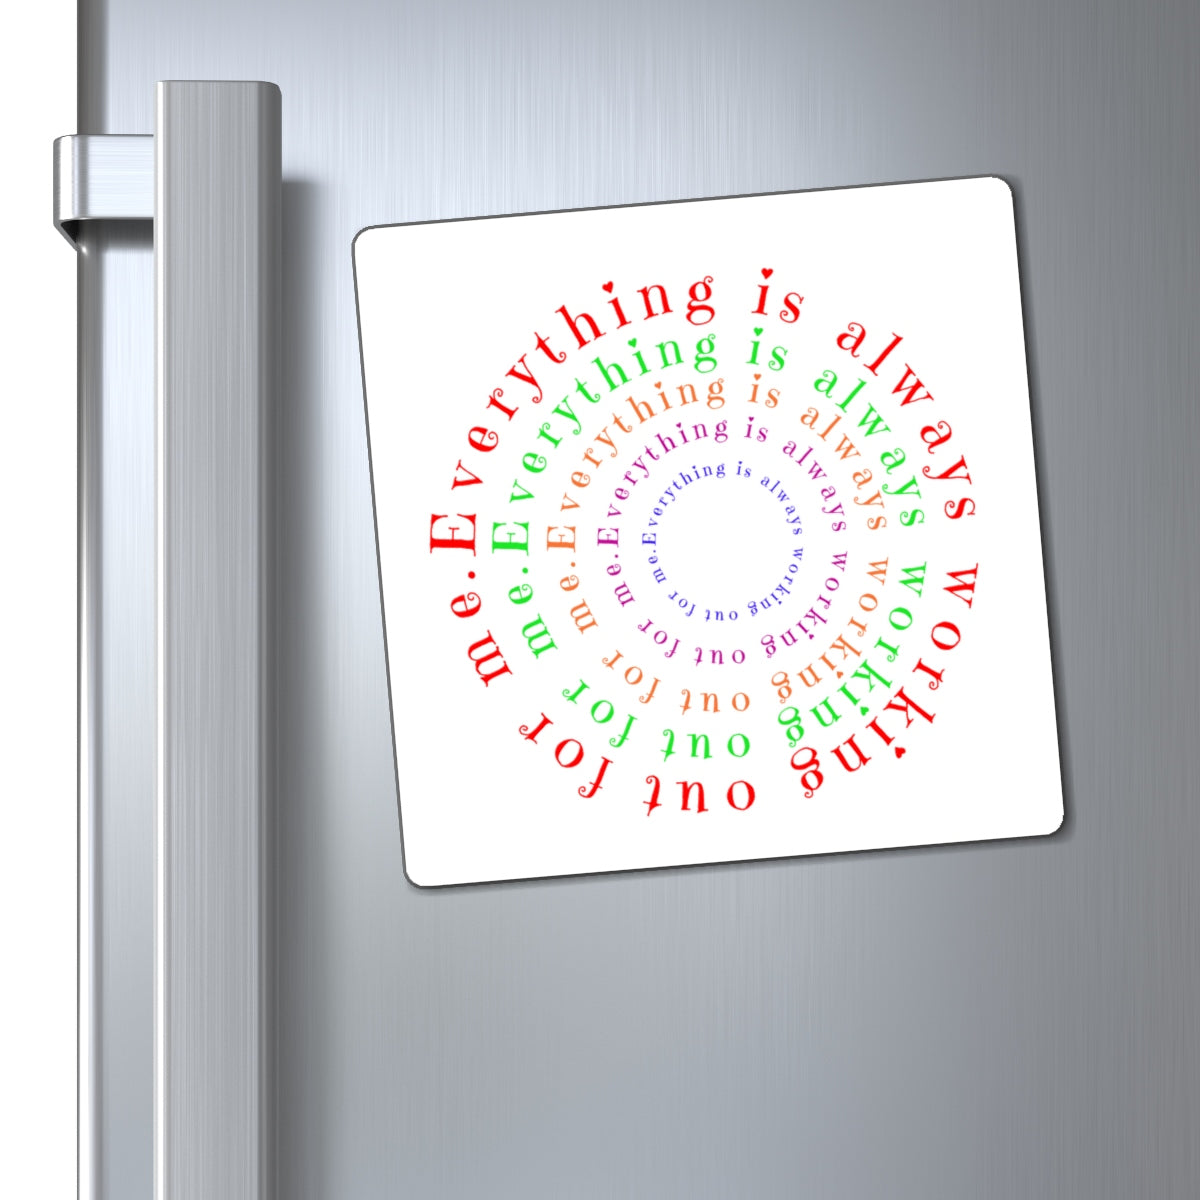 Law of Attraction Magnets "Everything is always working out for me."